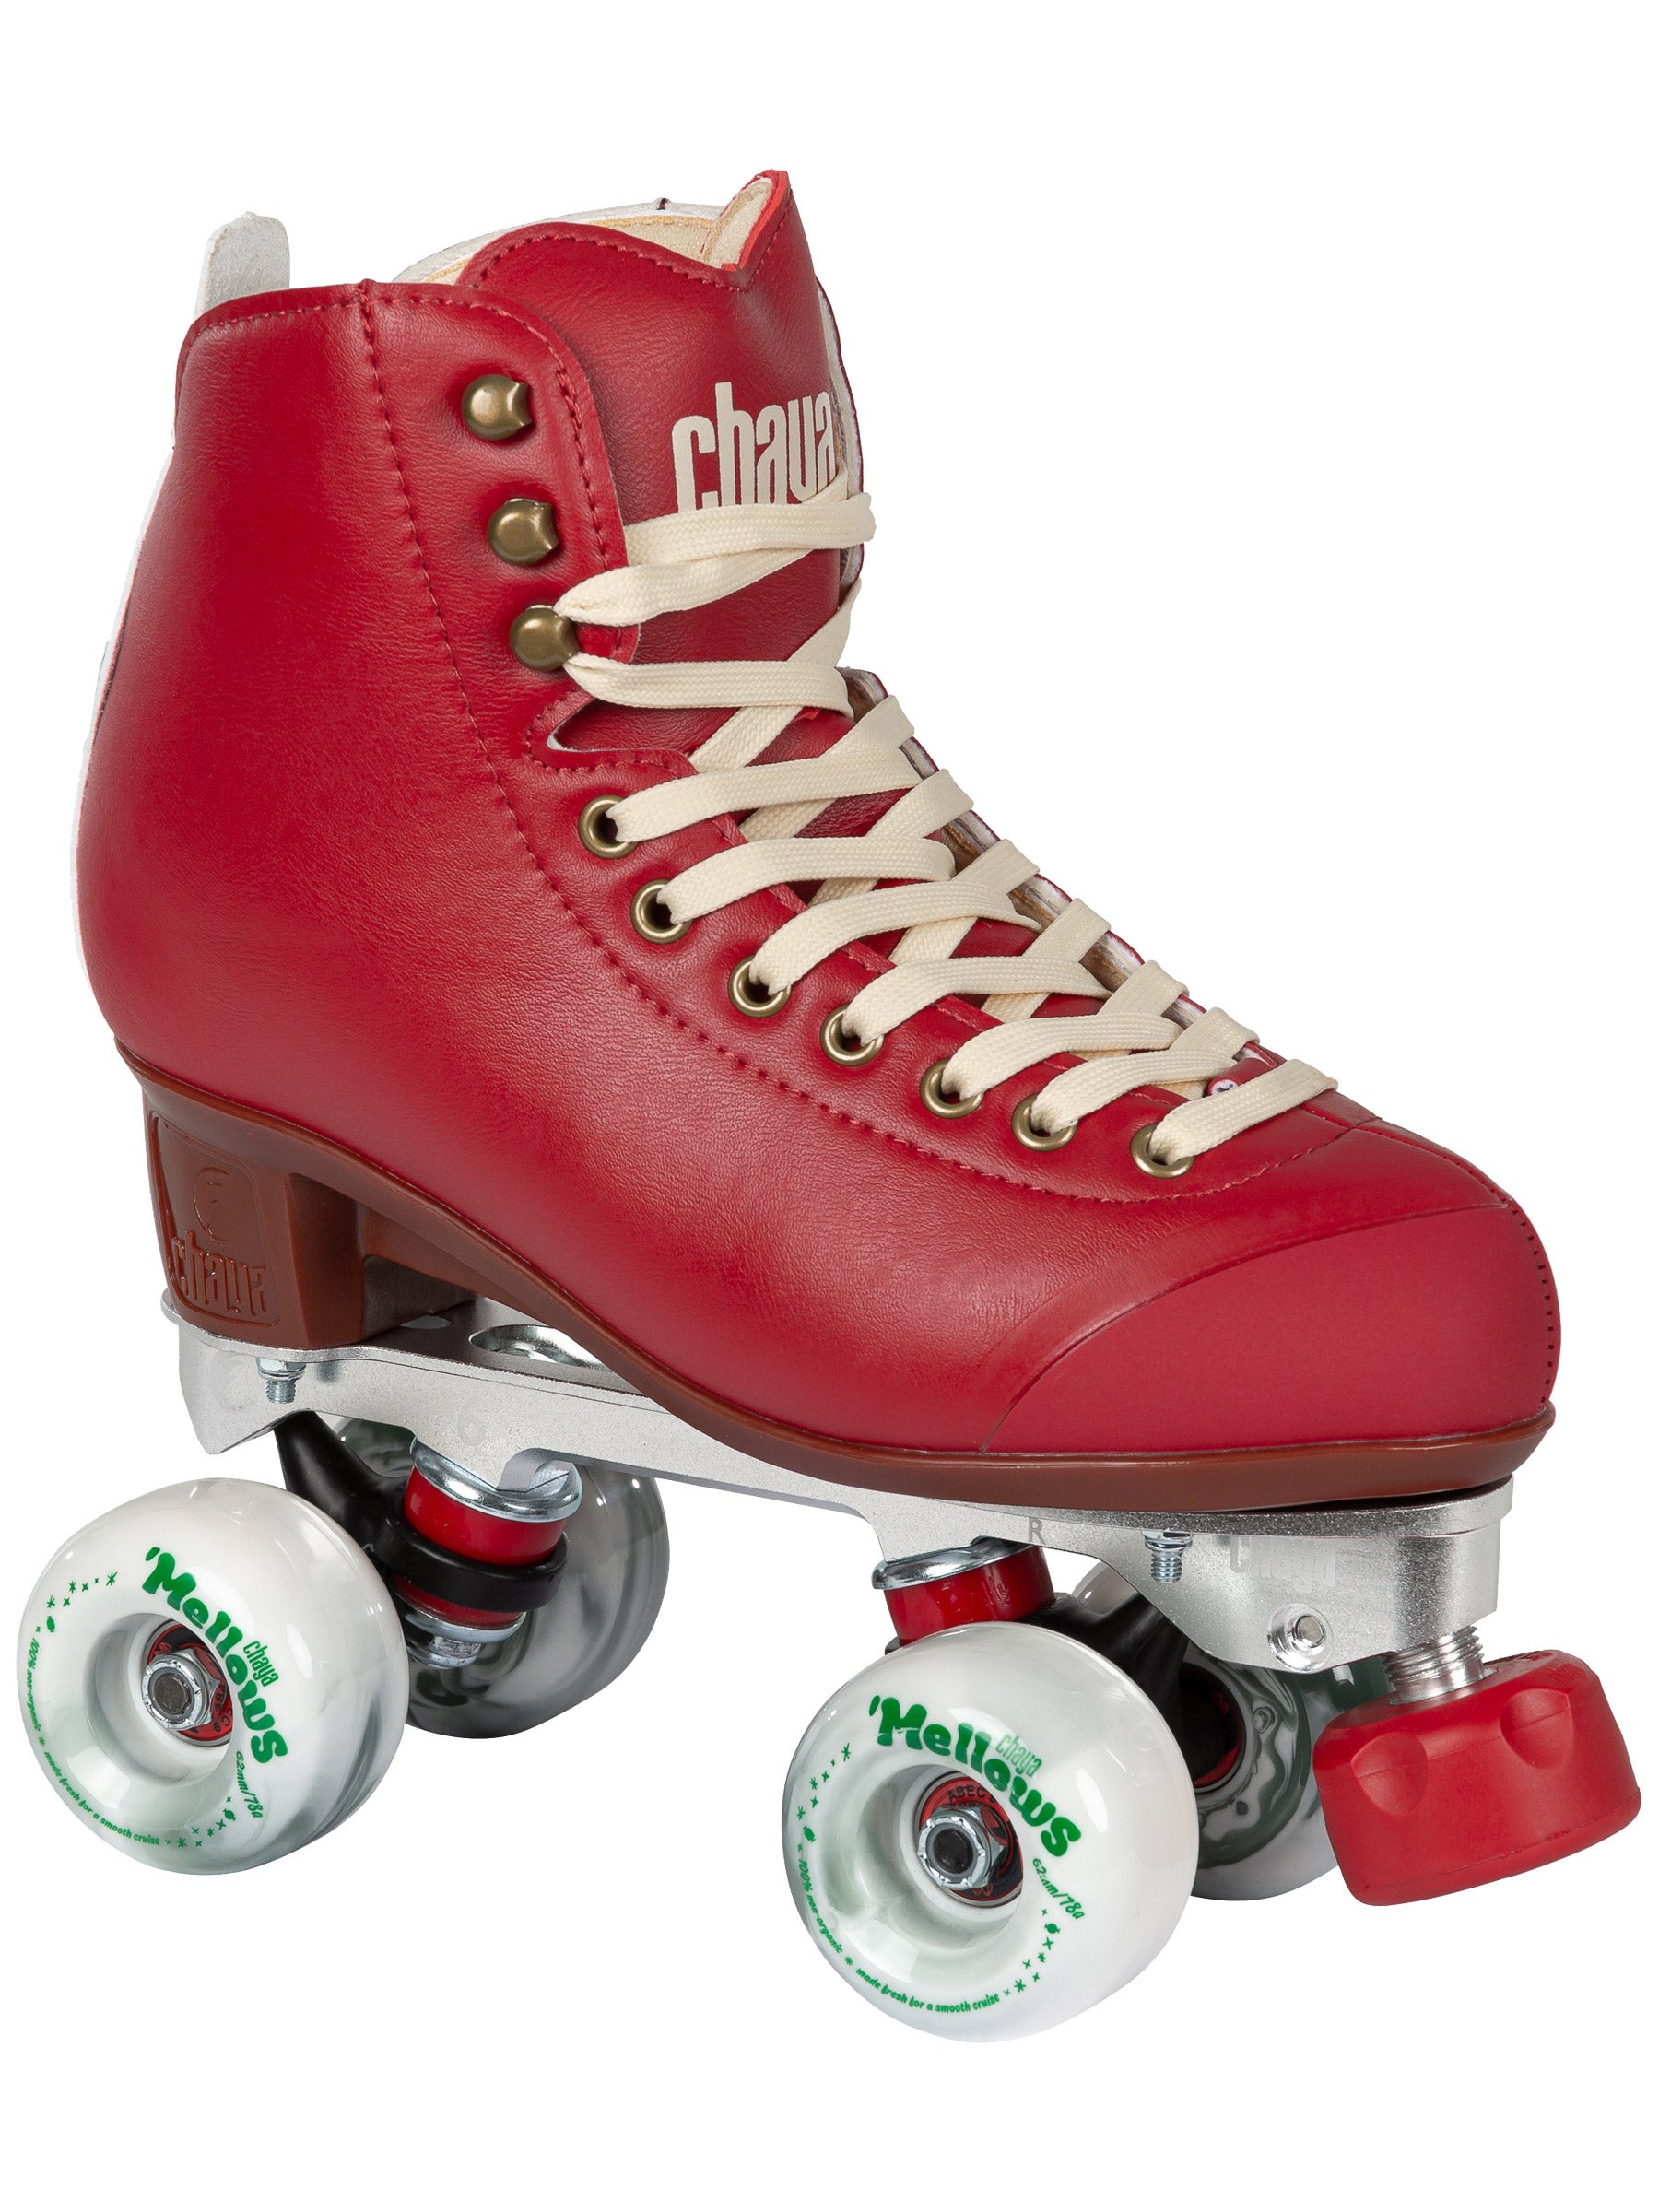 Chaya Jump Red Size 9 Skates Roller Quad Derby Skate Complete NEW 